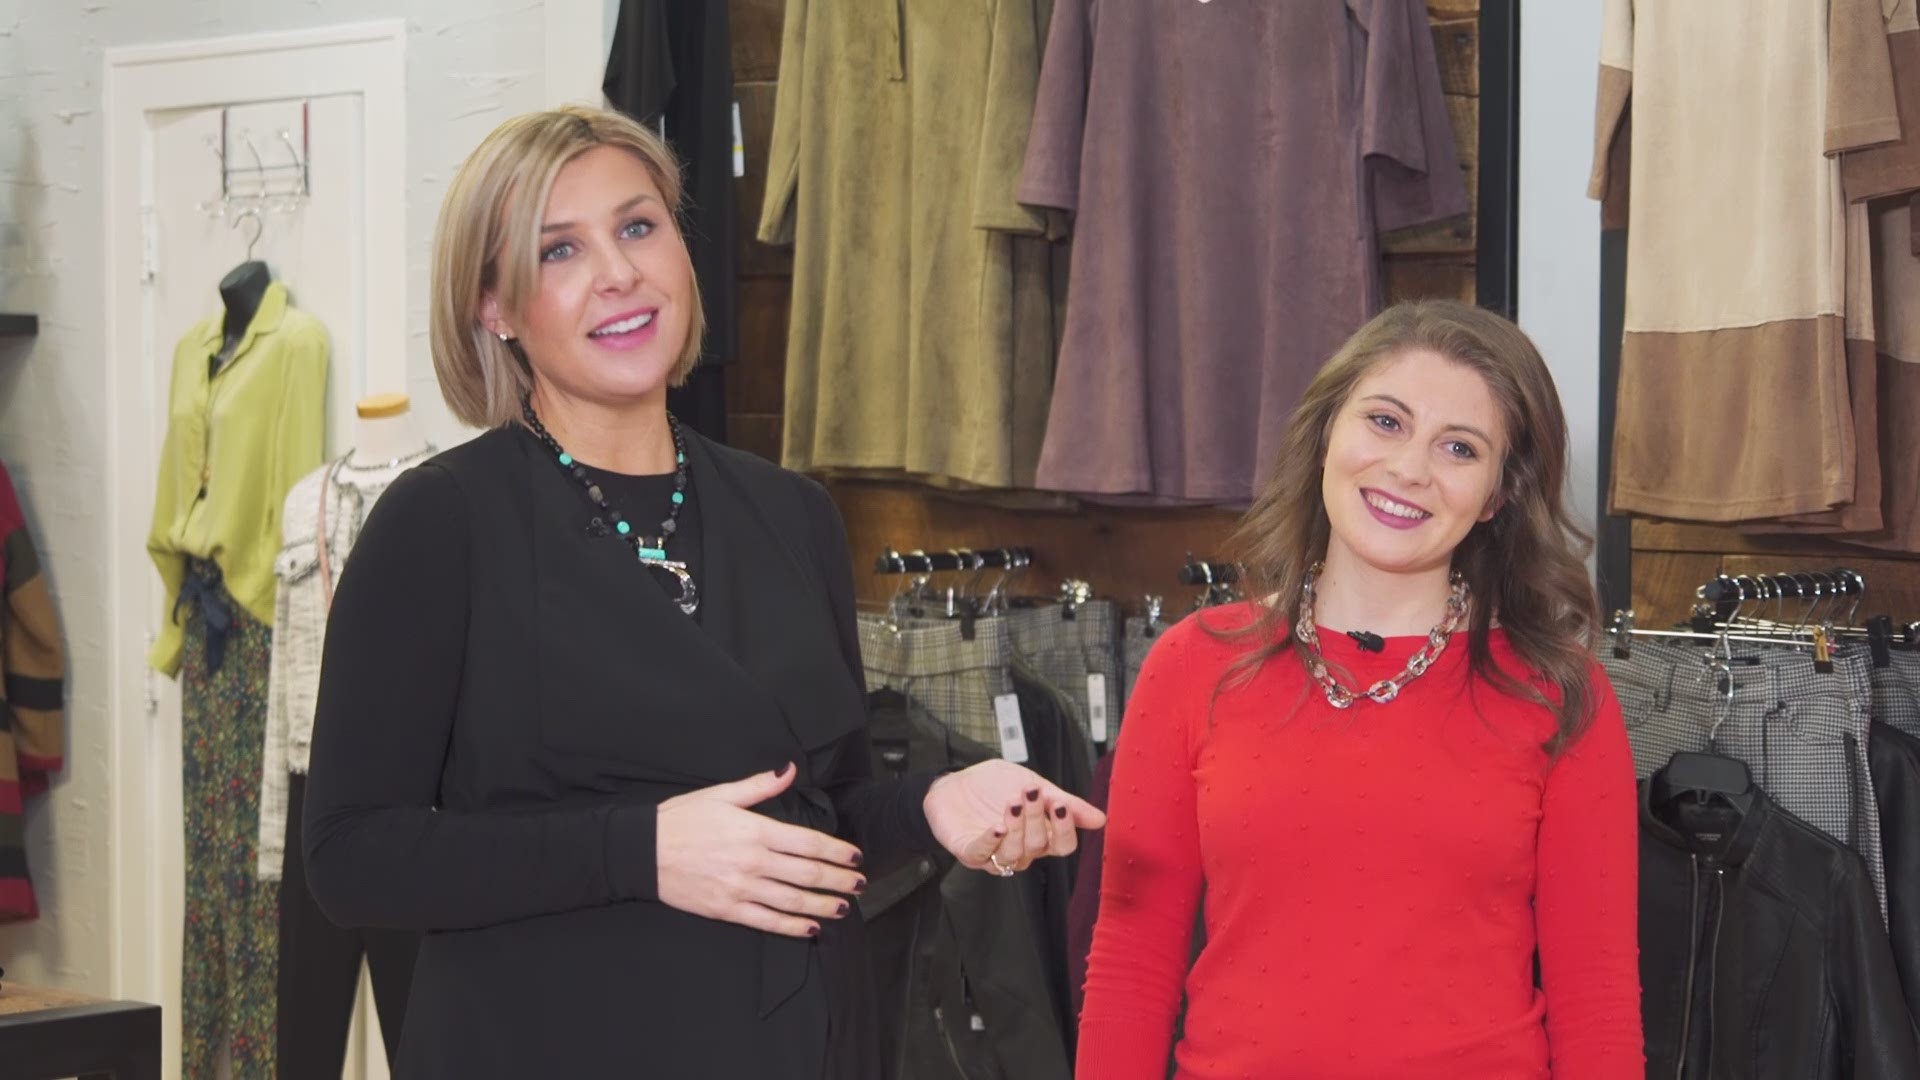 Sara Shookman and wardrobe stylist Megan Moran tell you how to care for your leggings and tights to get more wear out of them.